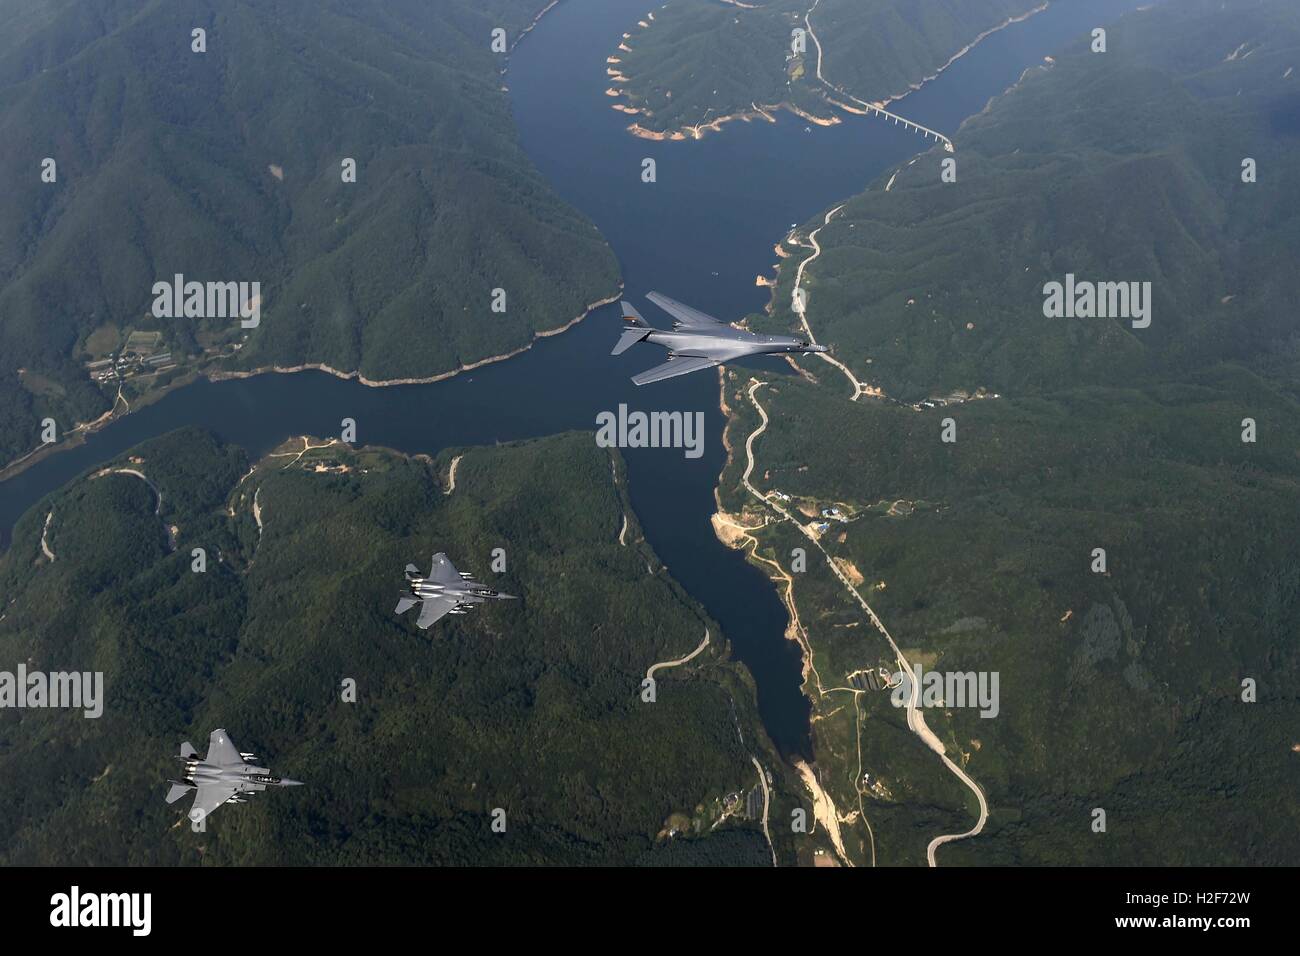 U.S. Air Force B1-B stealth strategic bomber and escort F-15 fighter aircraft fly close to the border between the Republic of Korea and North Korea September 21, 2016 in South Korea. Stock Photo